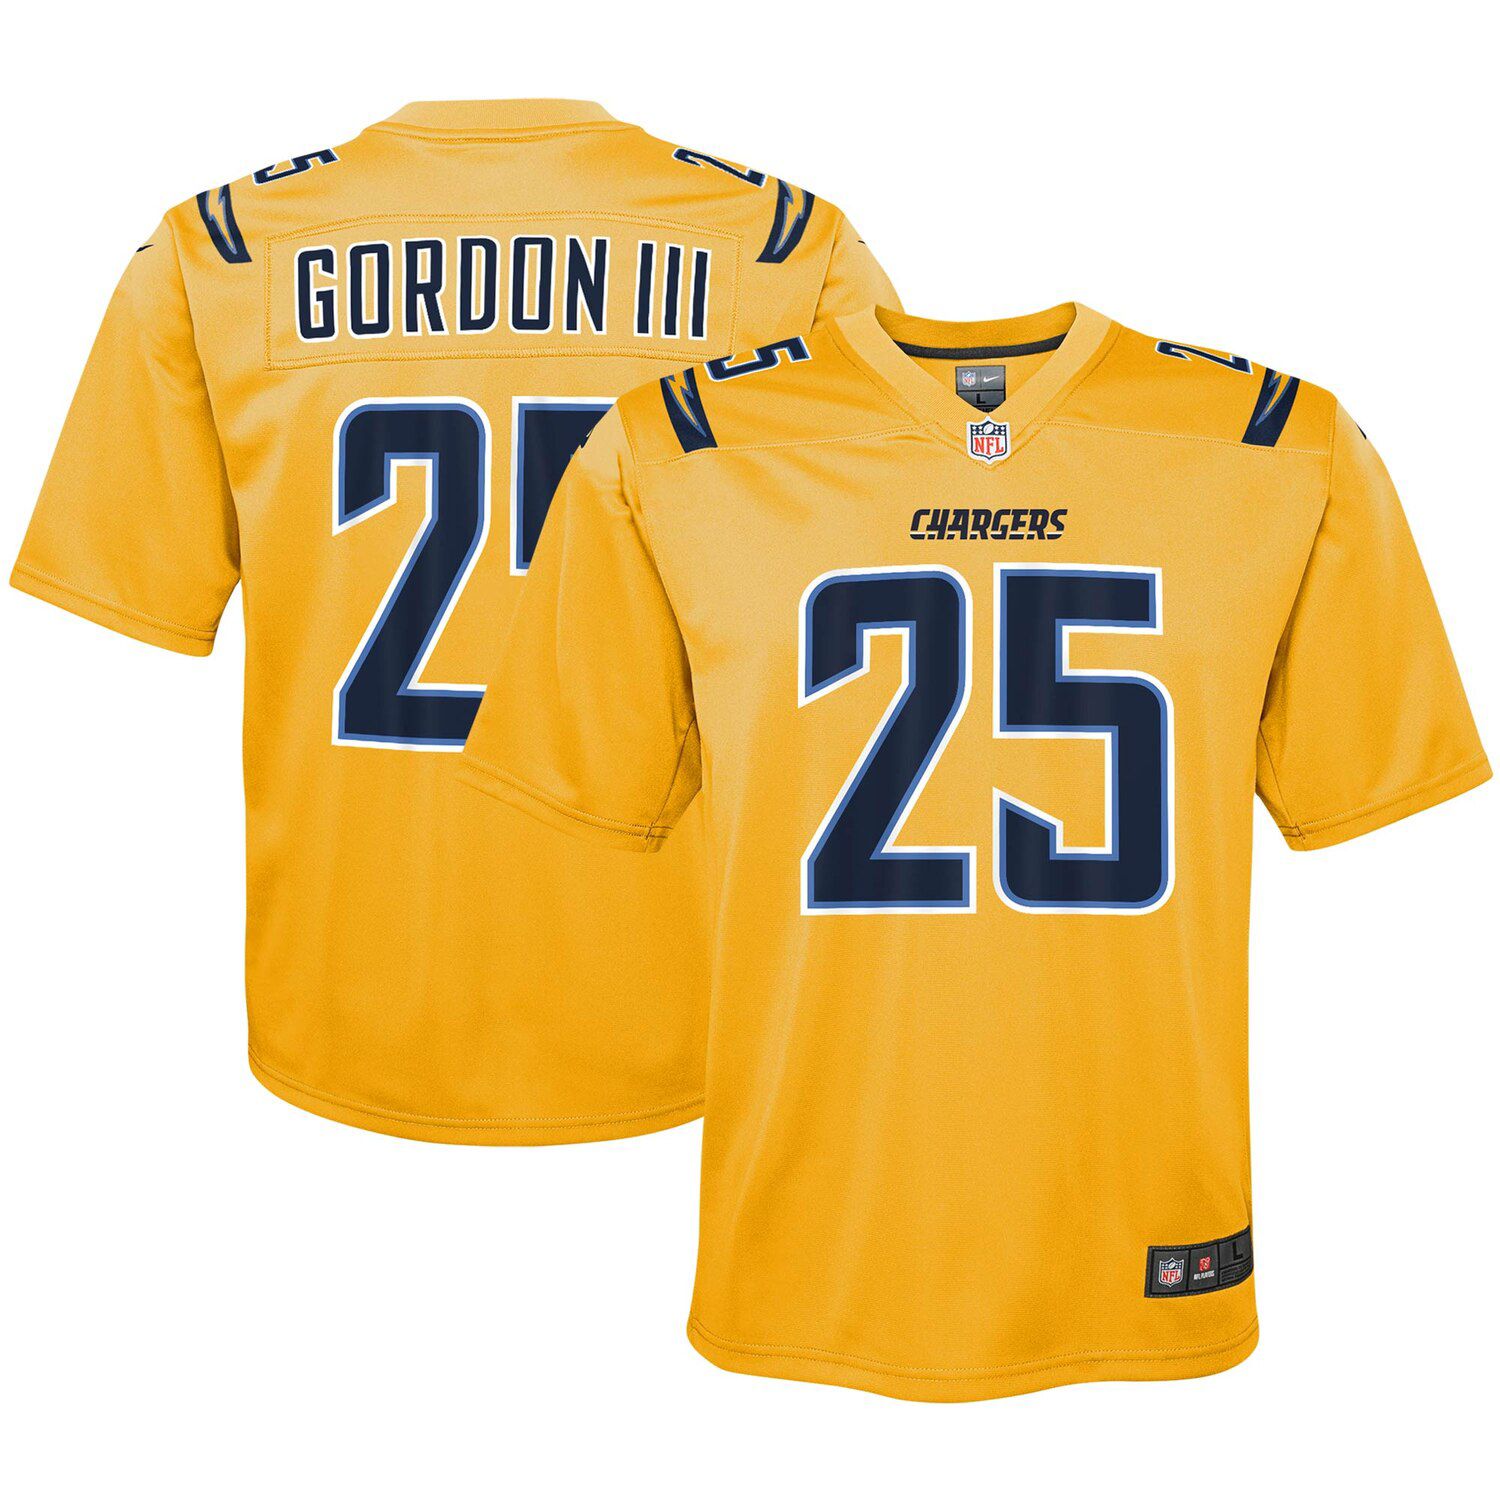 chargers gordon jersey